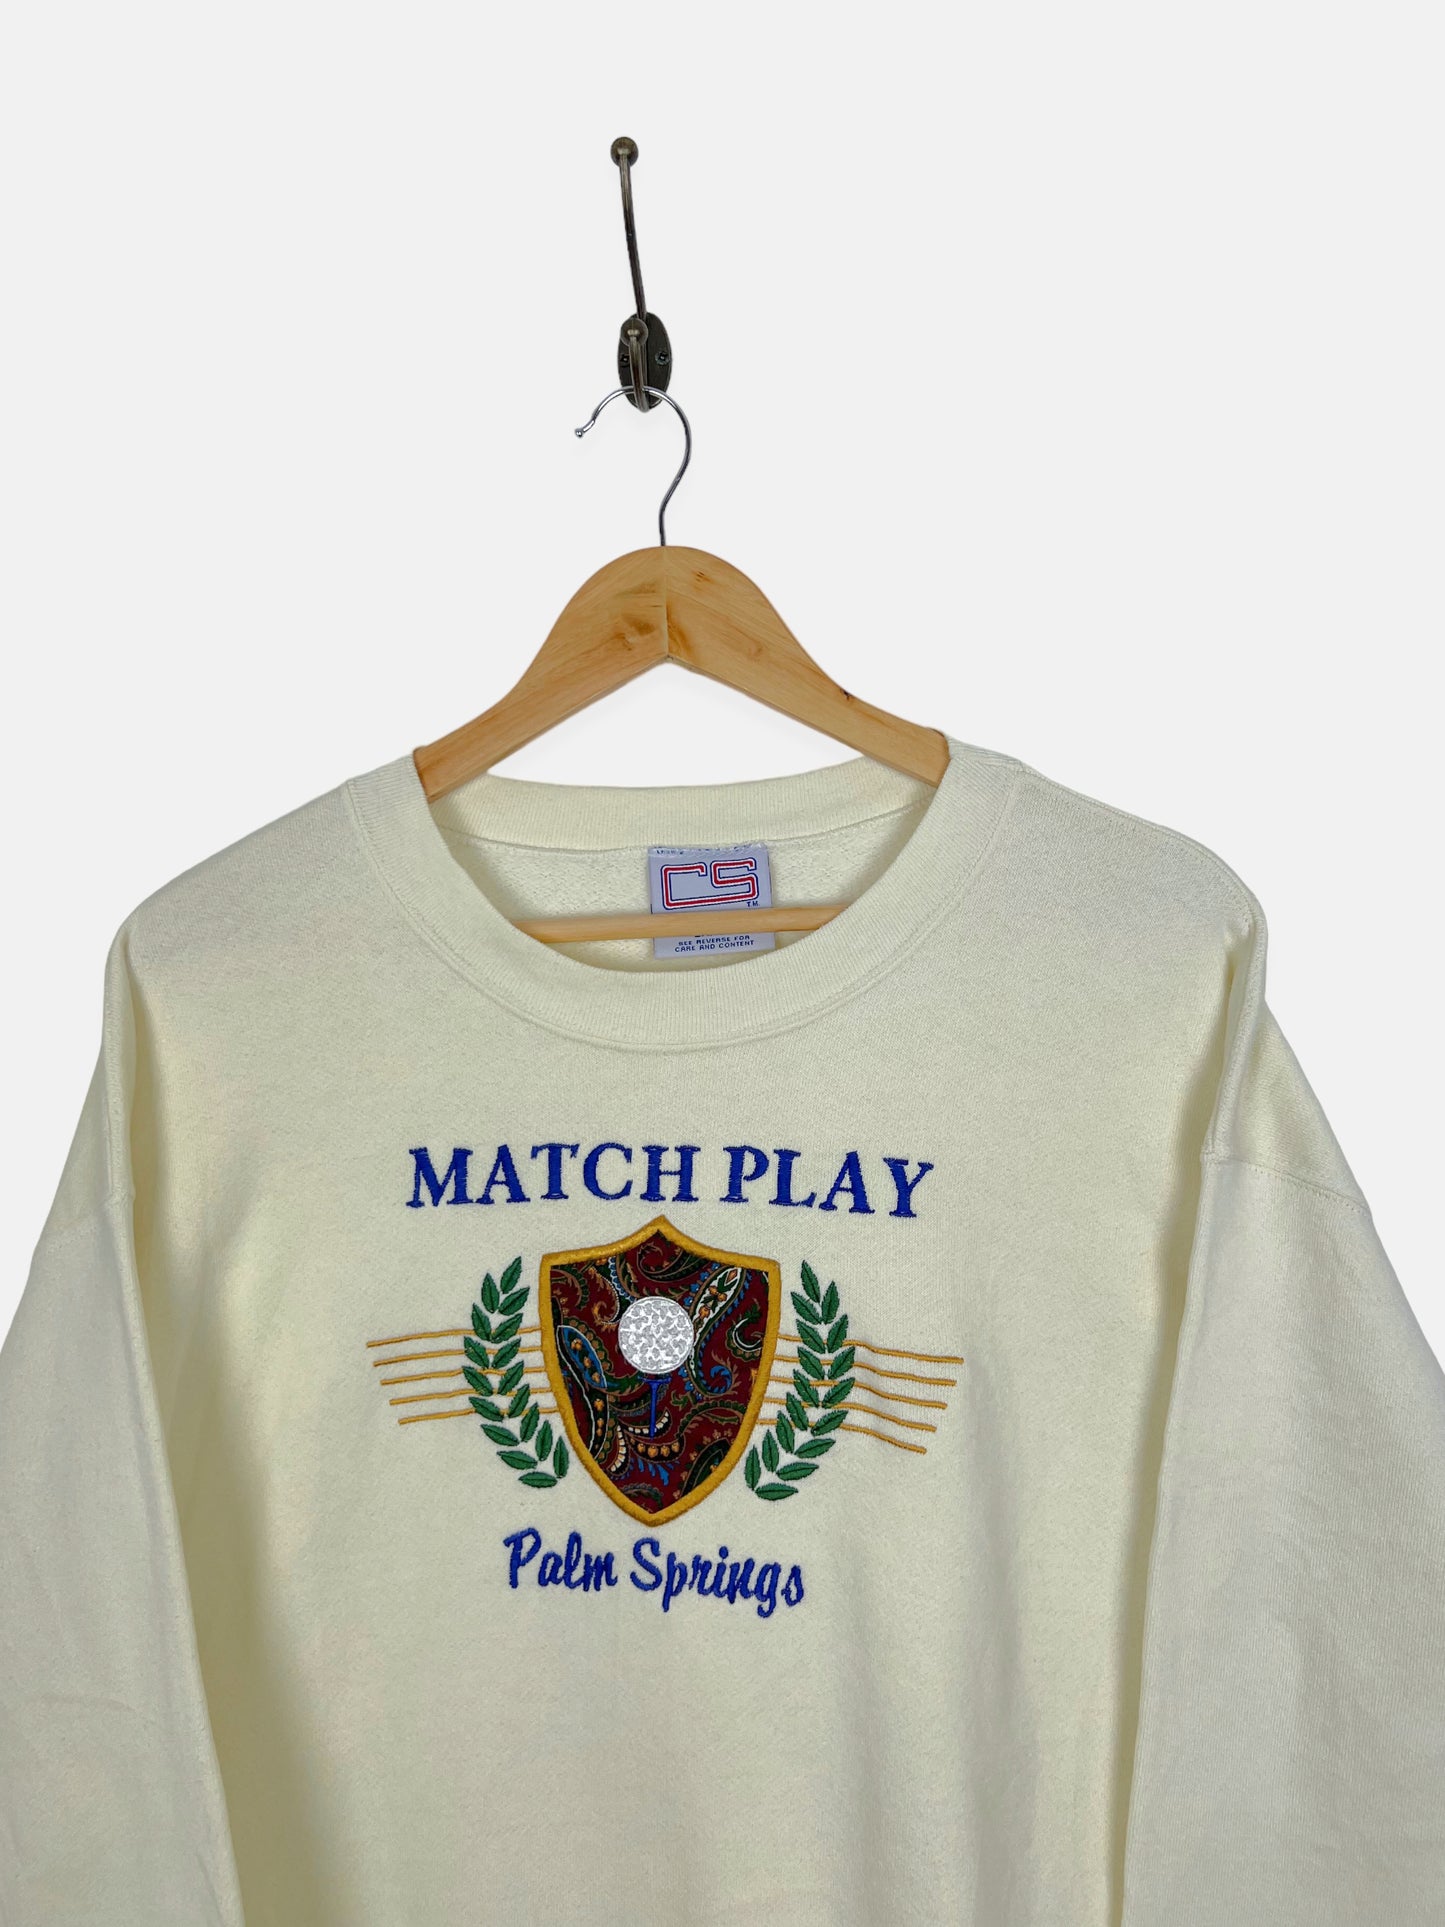 90's Matchplay Palm Springs USA Made Embroidered Vintage Sweatshirt Size L